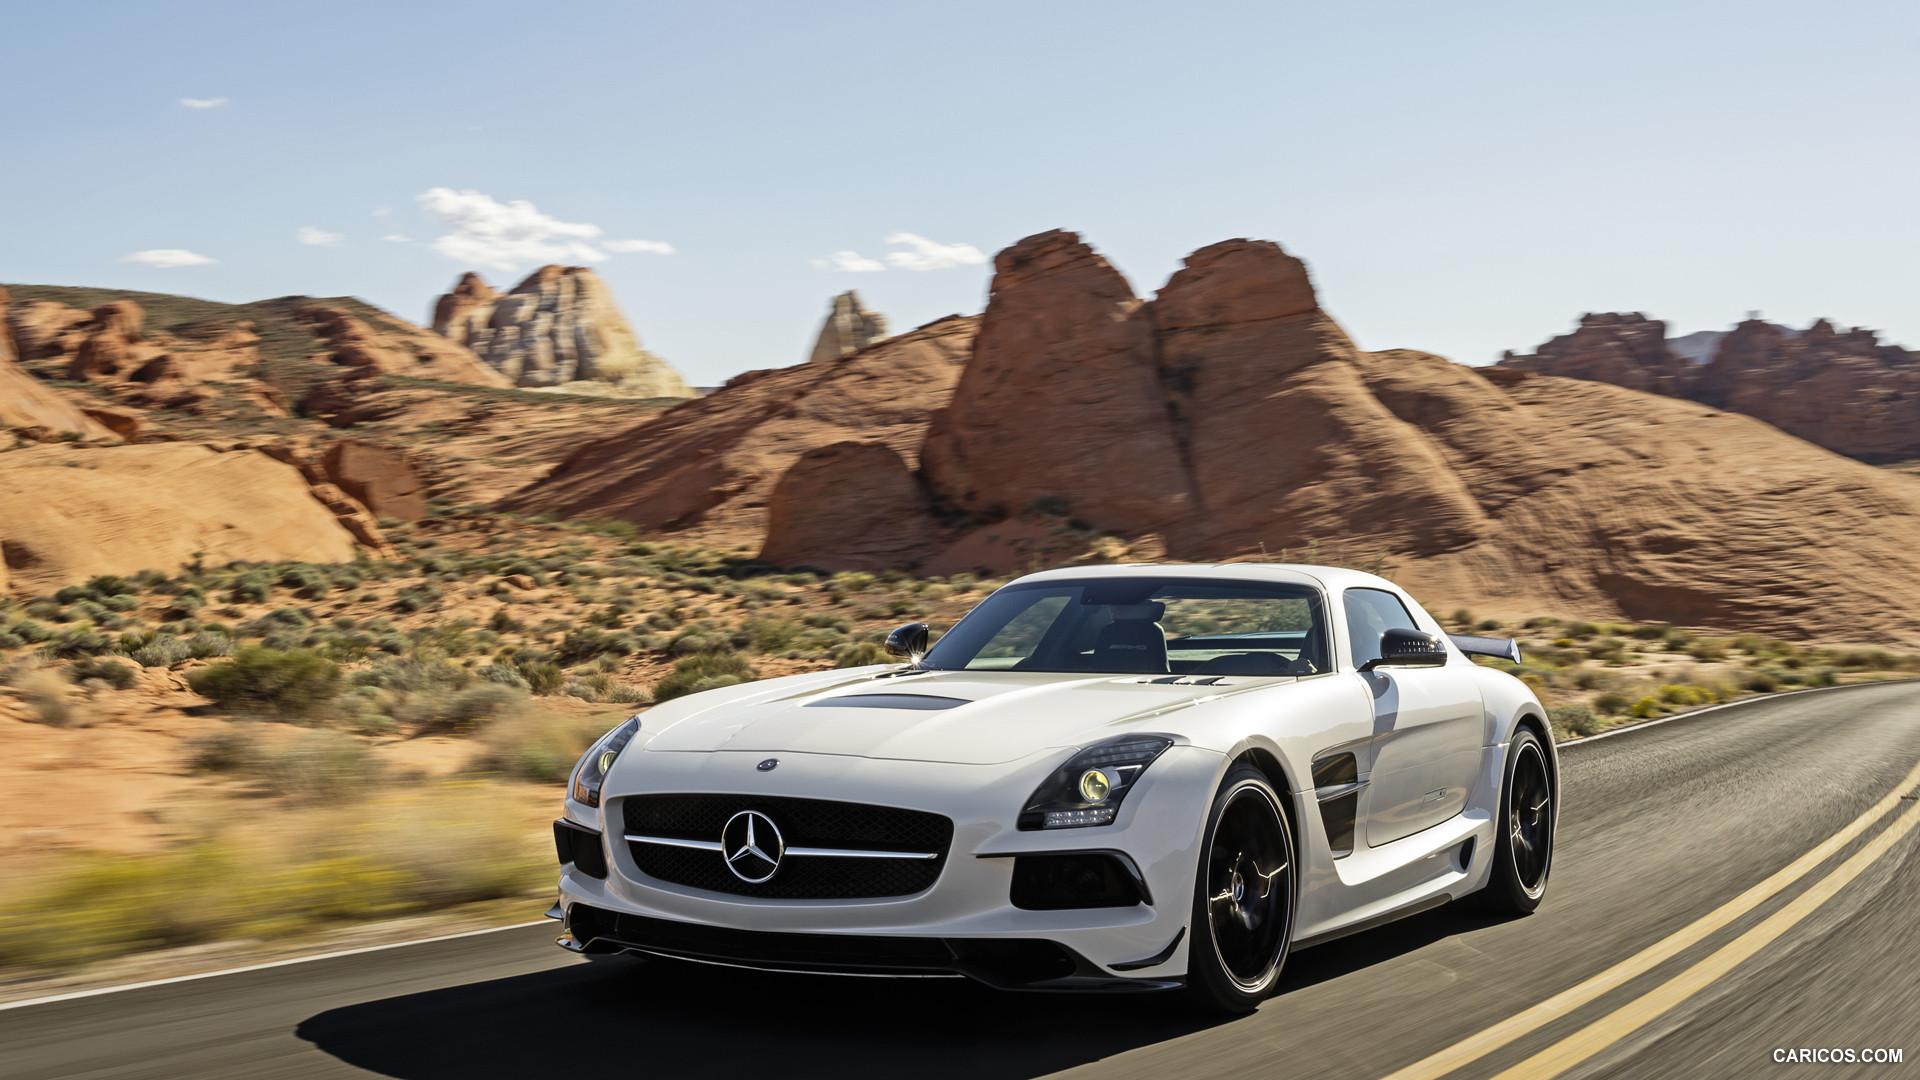 2014 Mercedes-Benz SLS AMG Coupe Black Series White - Front, #3 of 40